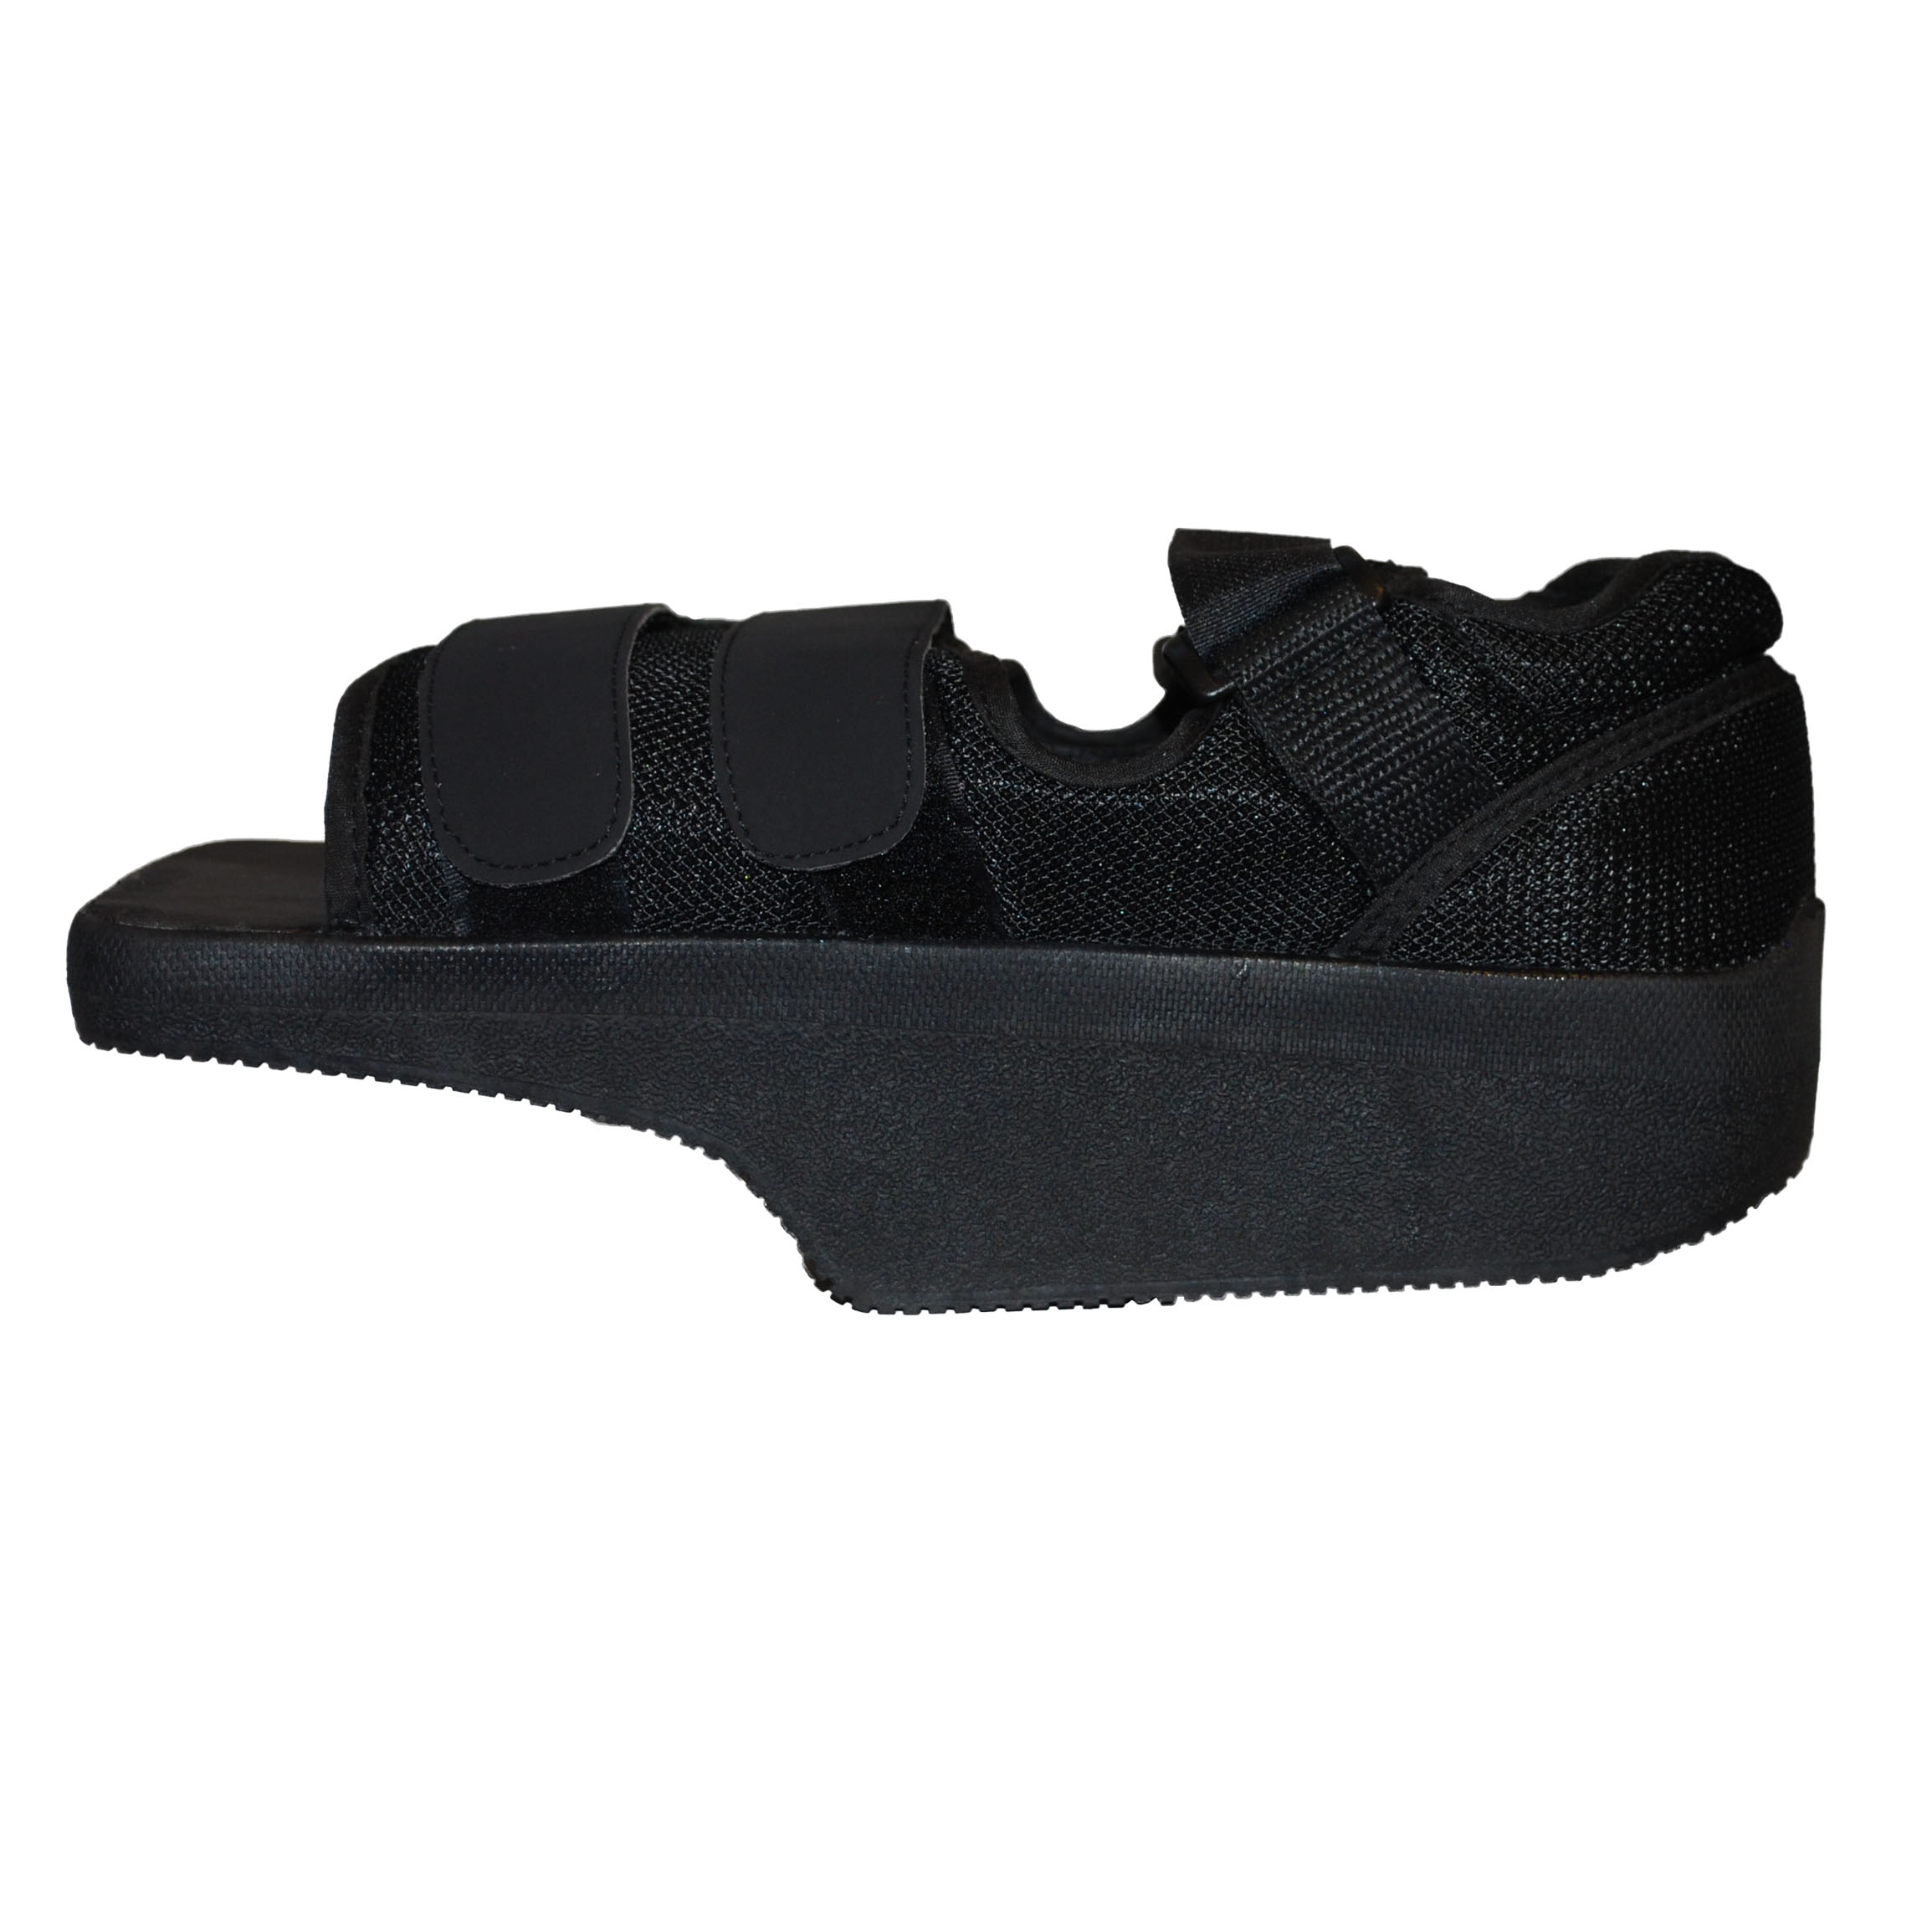 User-friendly Lightweight Orthowedge Forefoot Off-Loading Healing Shoe